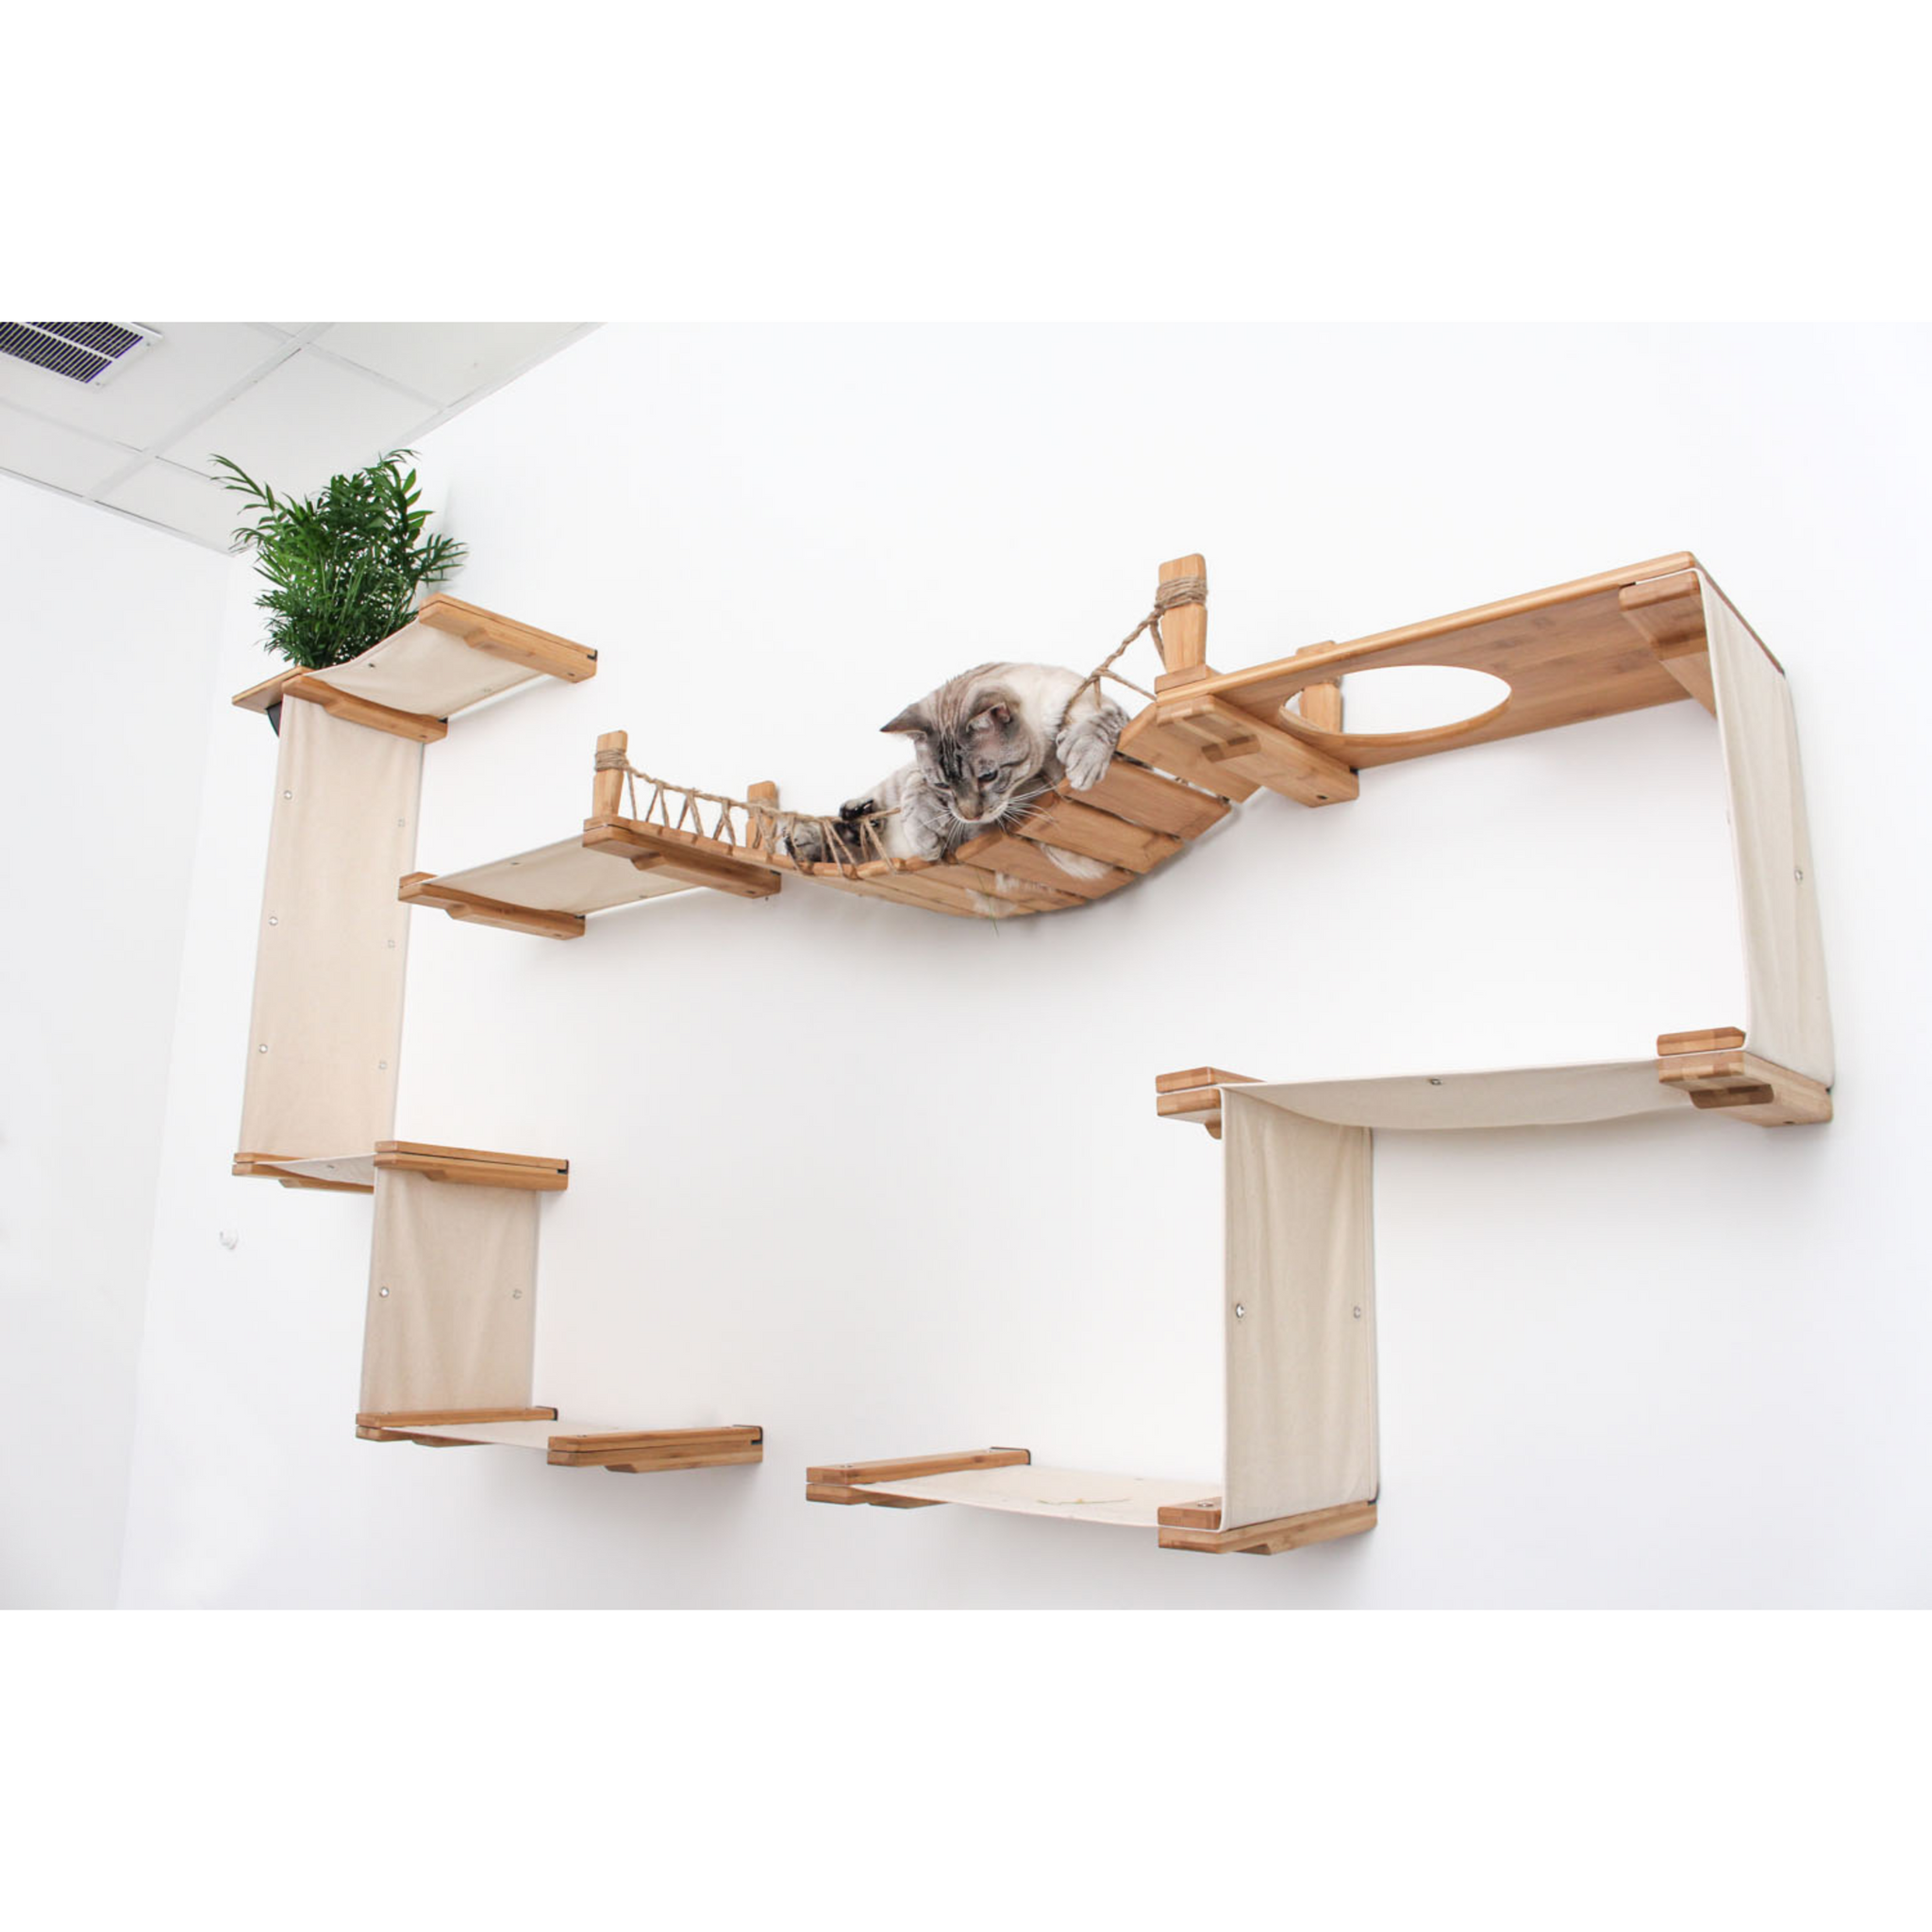 The Temple Cat Tree (Cat Condo For Walls) by Catastrophic Creations